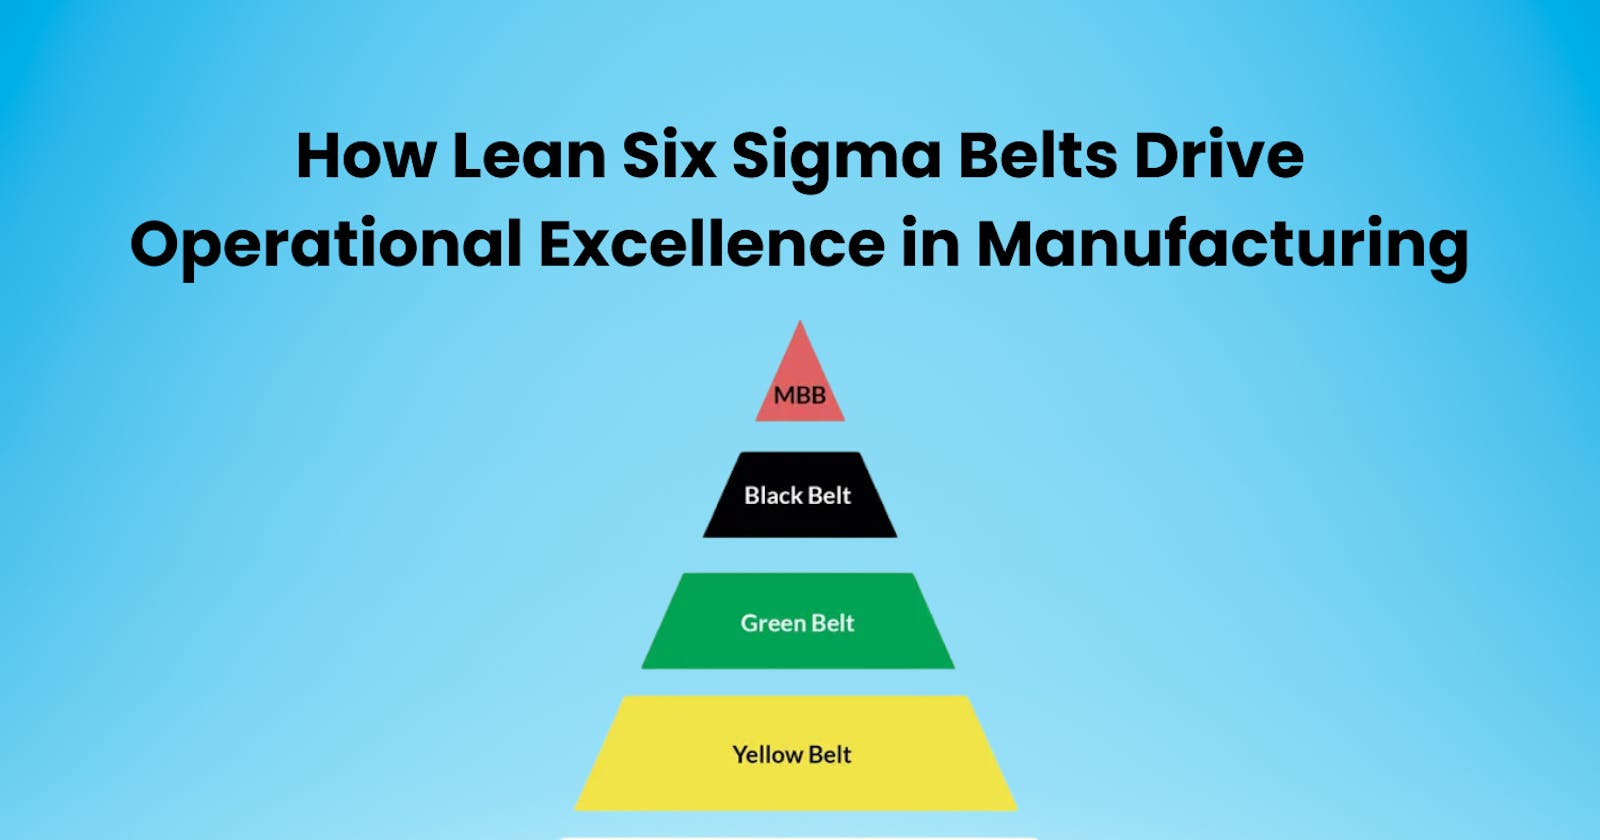 How Lean Six Sigma Belts Drive Operational Excellence in Manufacturing